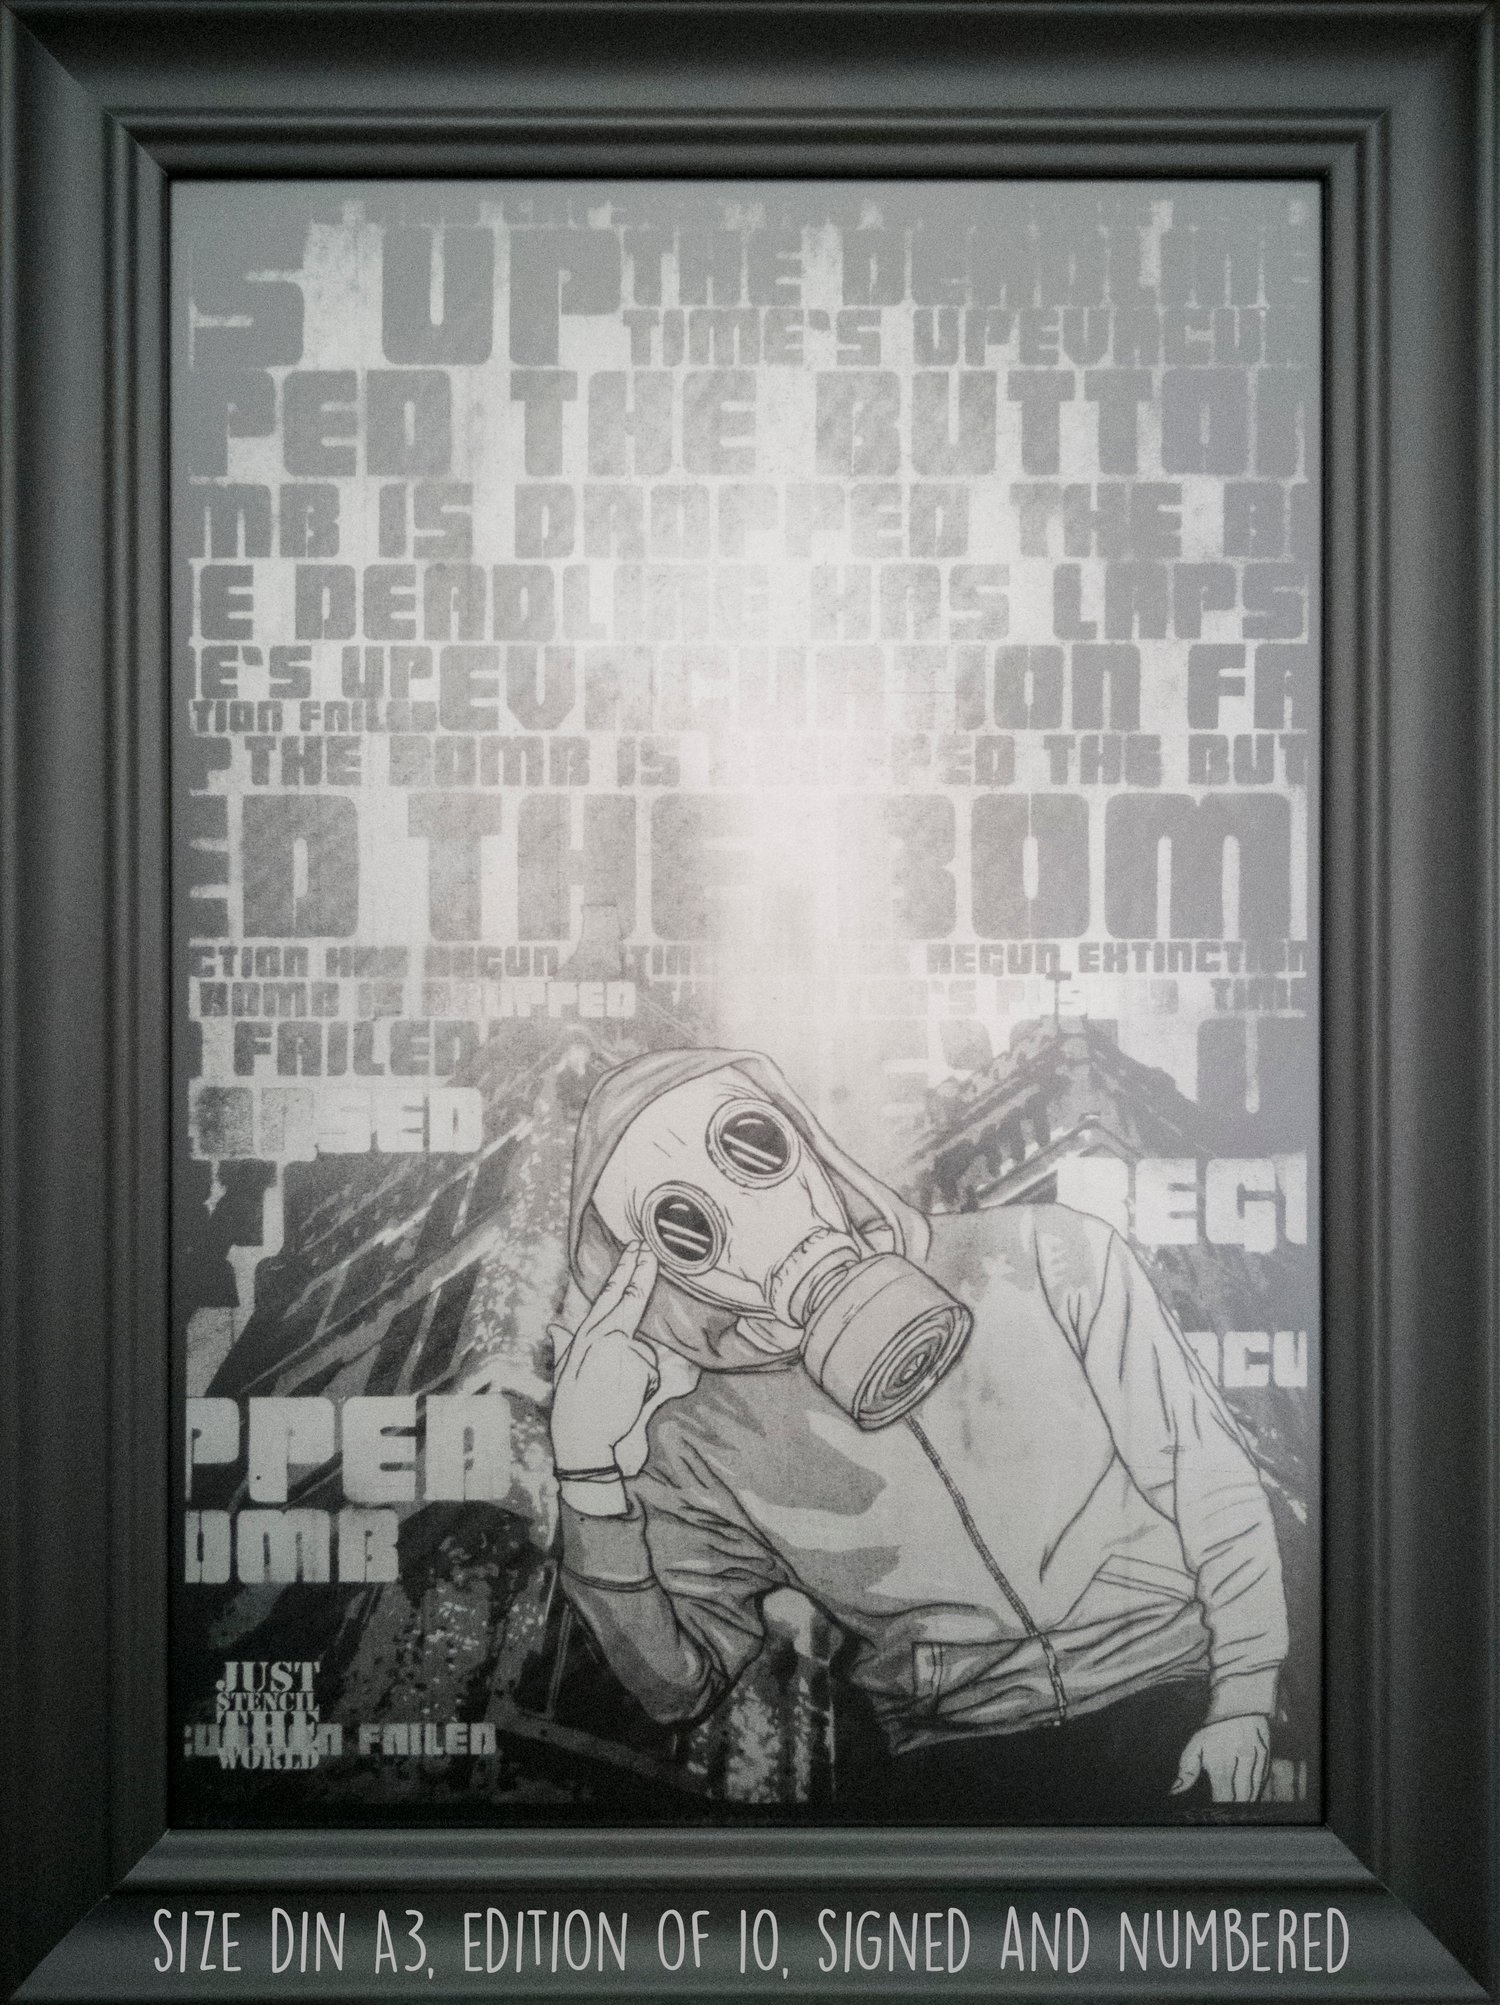 Image of Screen print "game over" silver limited